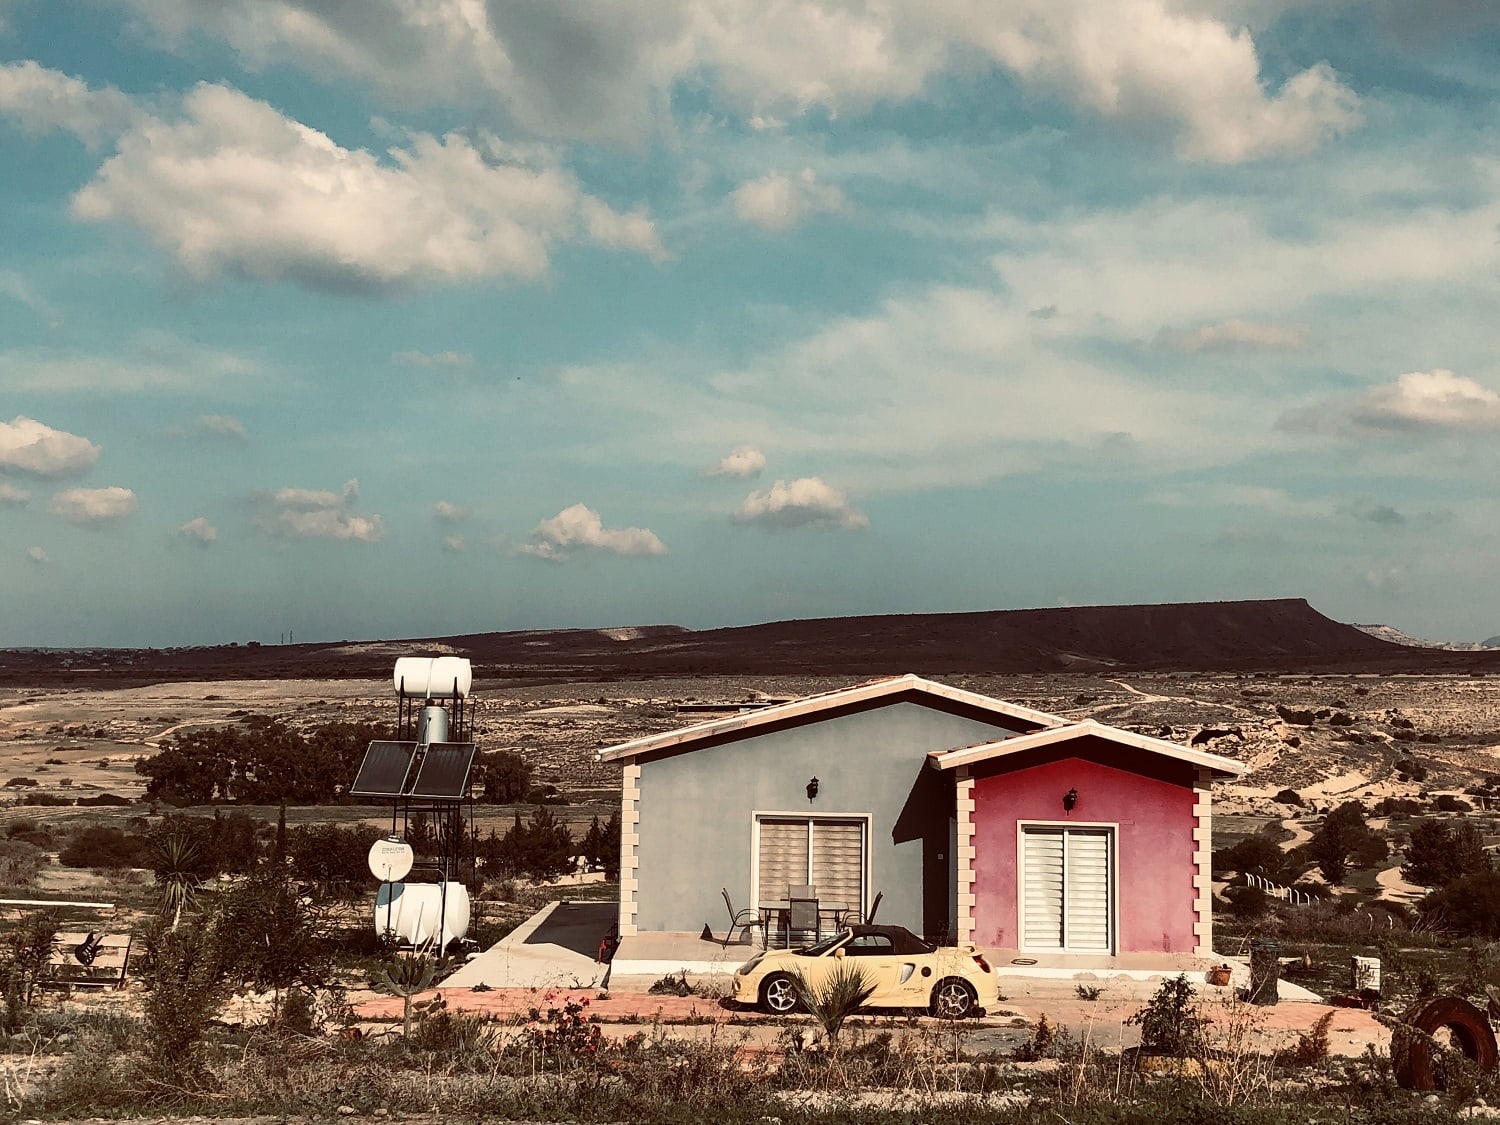 A yellow car is parked in front of a red and blue house in the desert.. Cars are items that fall under consumer price inflation but real estate is an asset and is a great hedge against inflation.